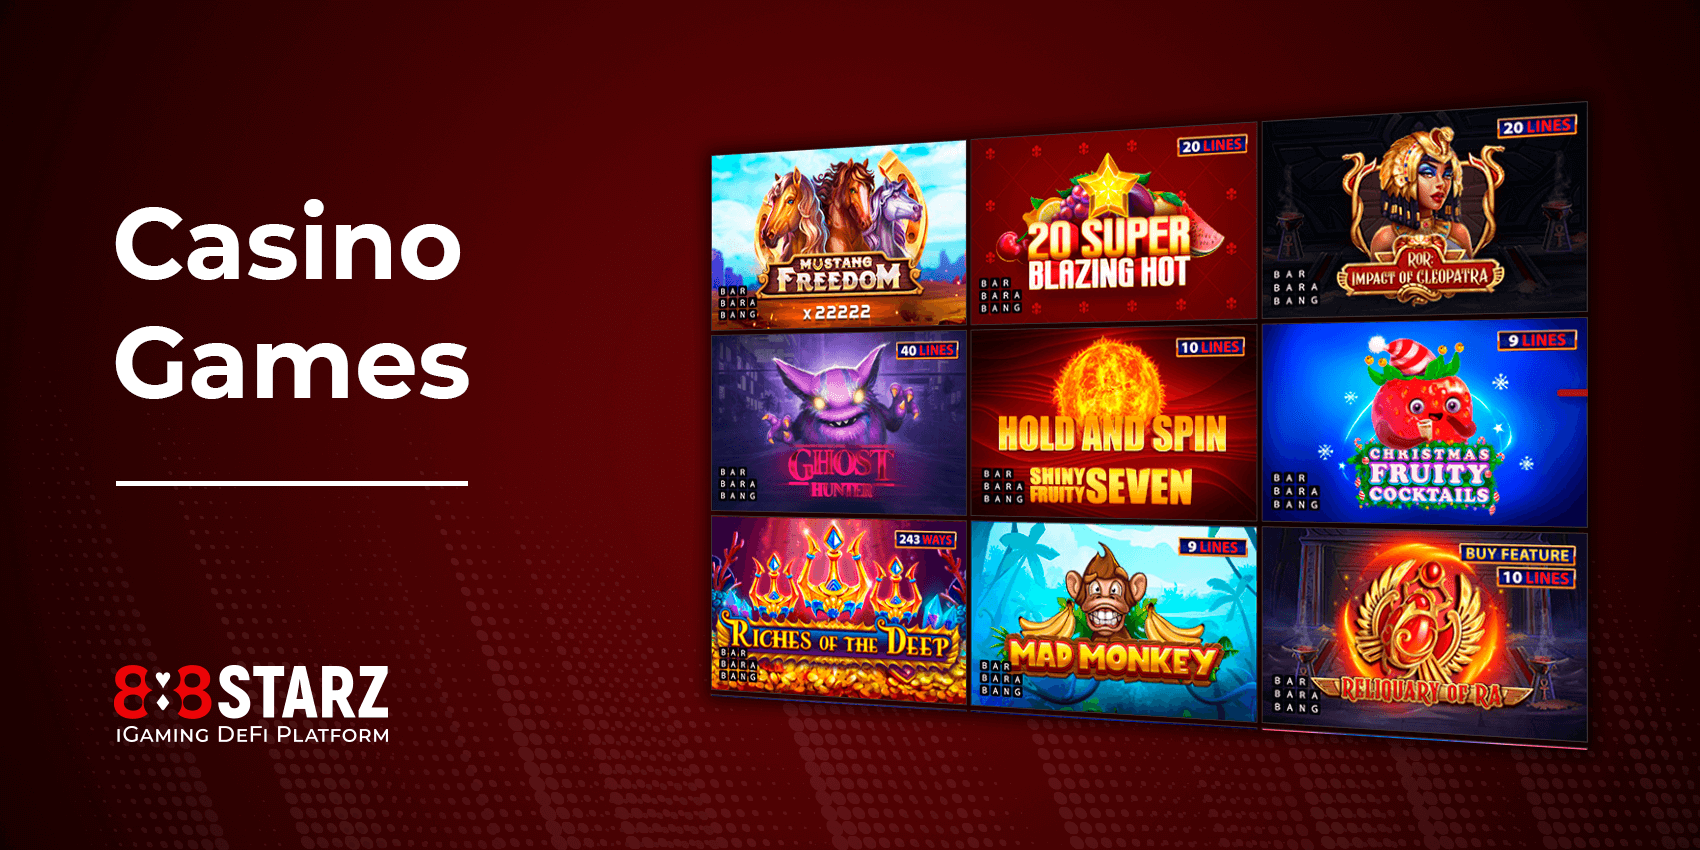 Available Casino Games